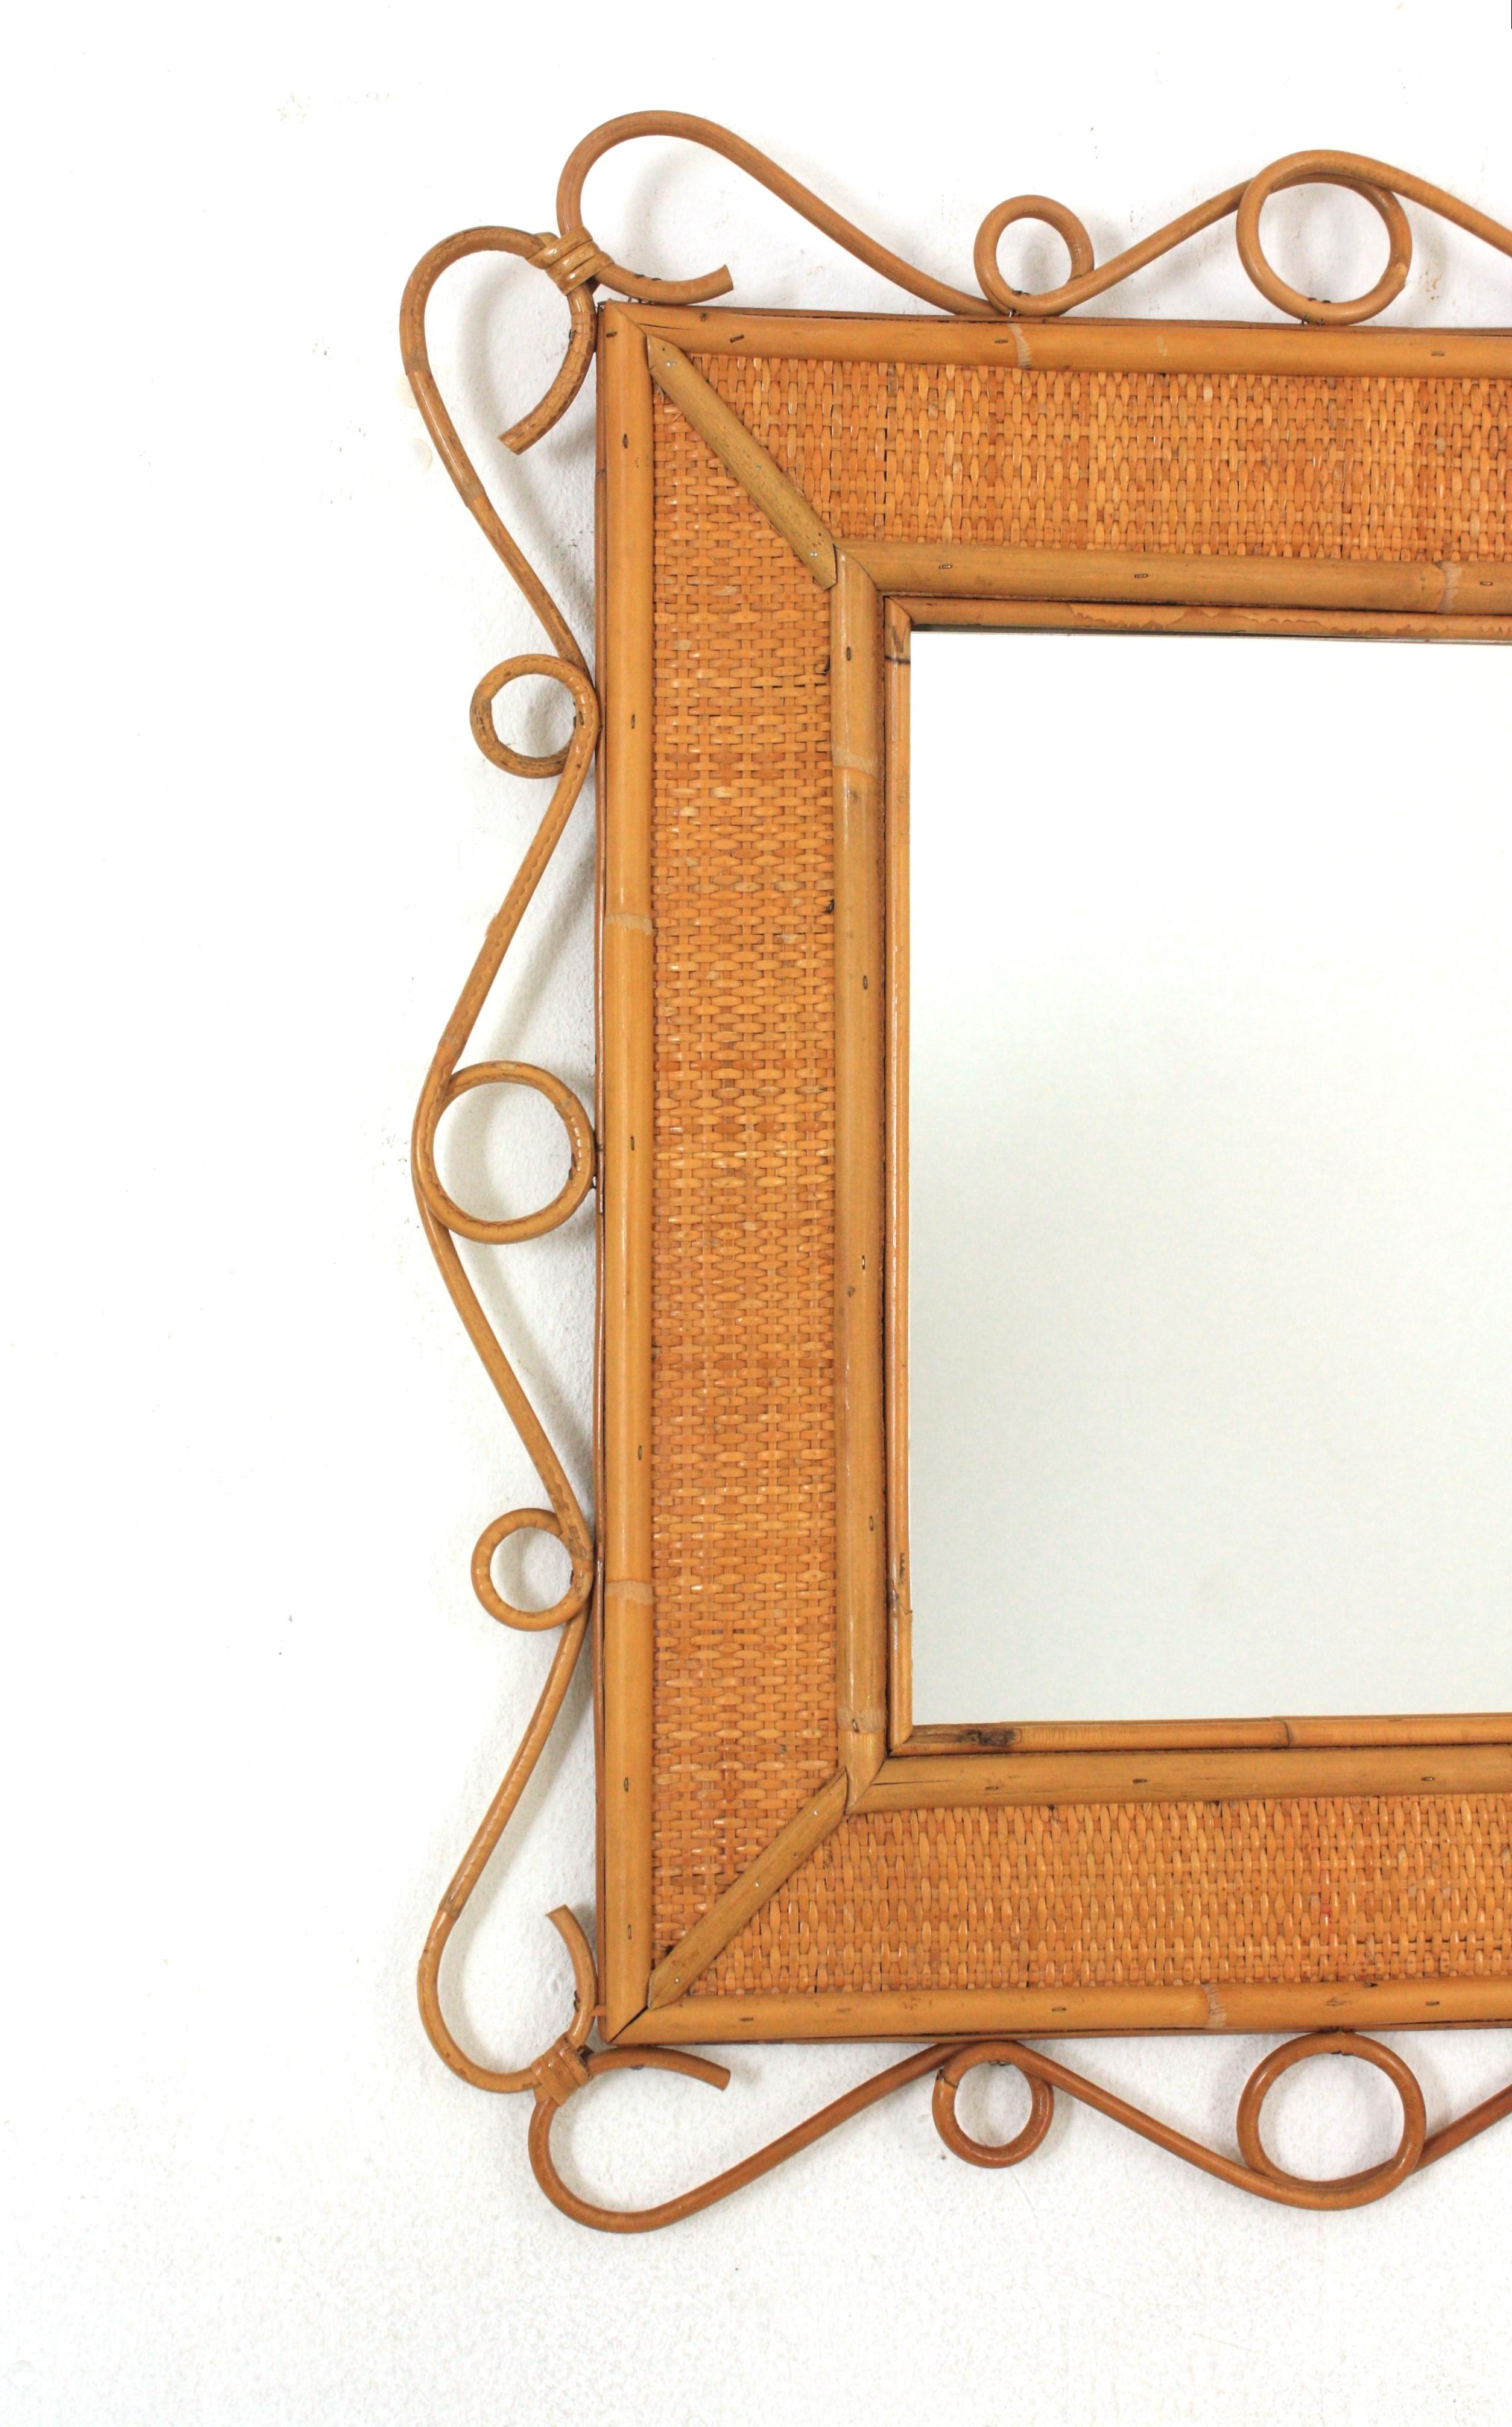 Hand-Crafted Rattan Rectangular Mirror with Scroll Motif, Franco Albini Style